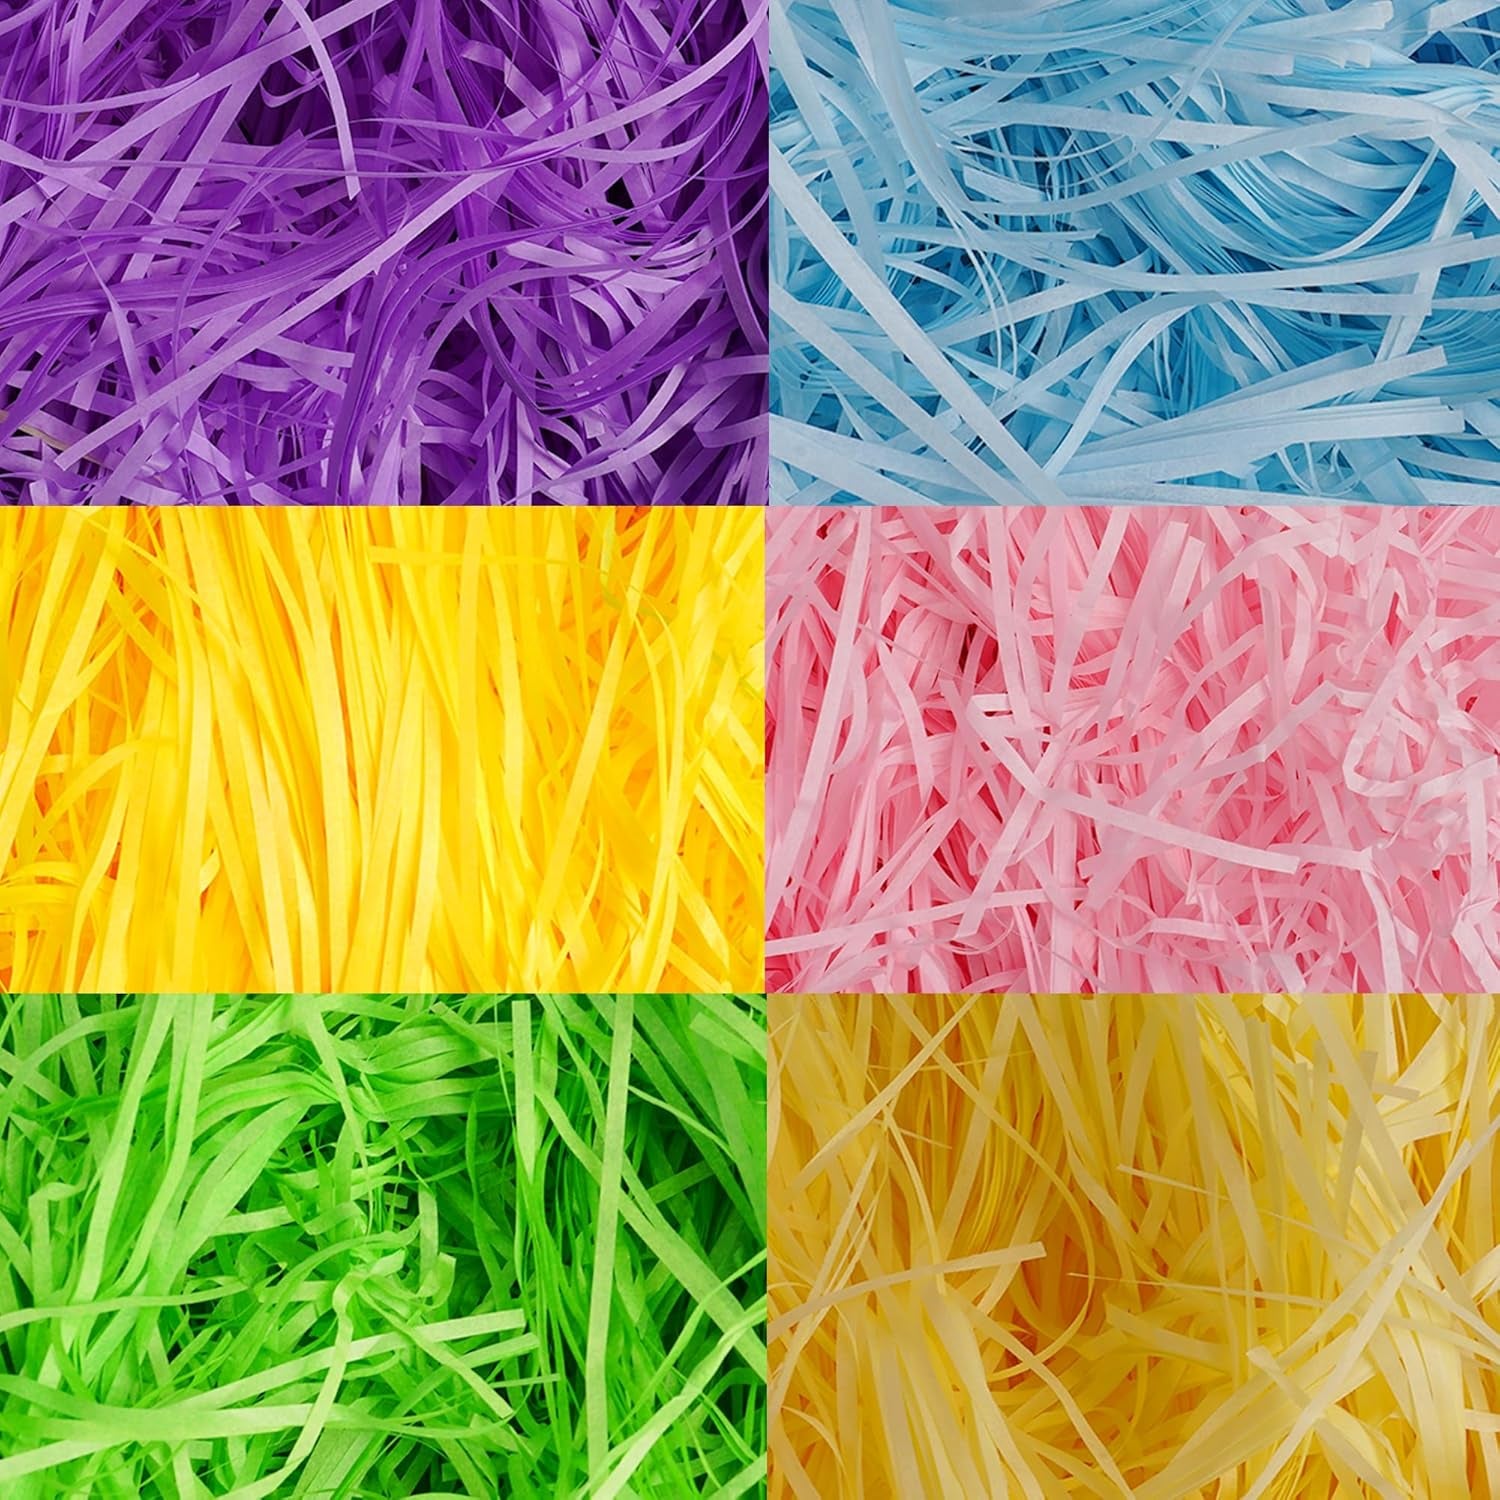 12Oz 6 Colors Crinkle Cut Paper Shred Filler for Gift Wrapping Basket Filling, Easter, Valentine'S Day, Birthday, Christmas, Thanksgiving, Wedding, Mother'S Day(12 Oz)